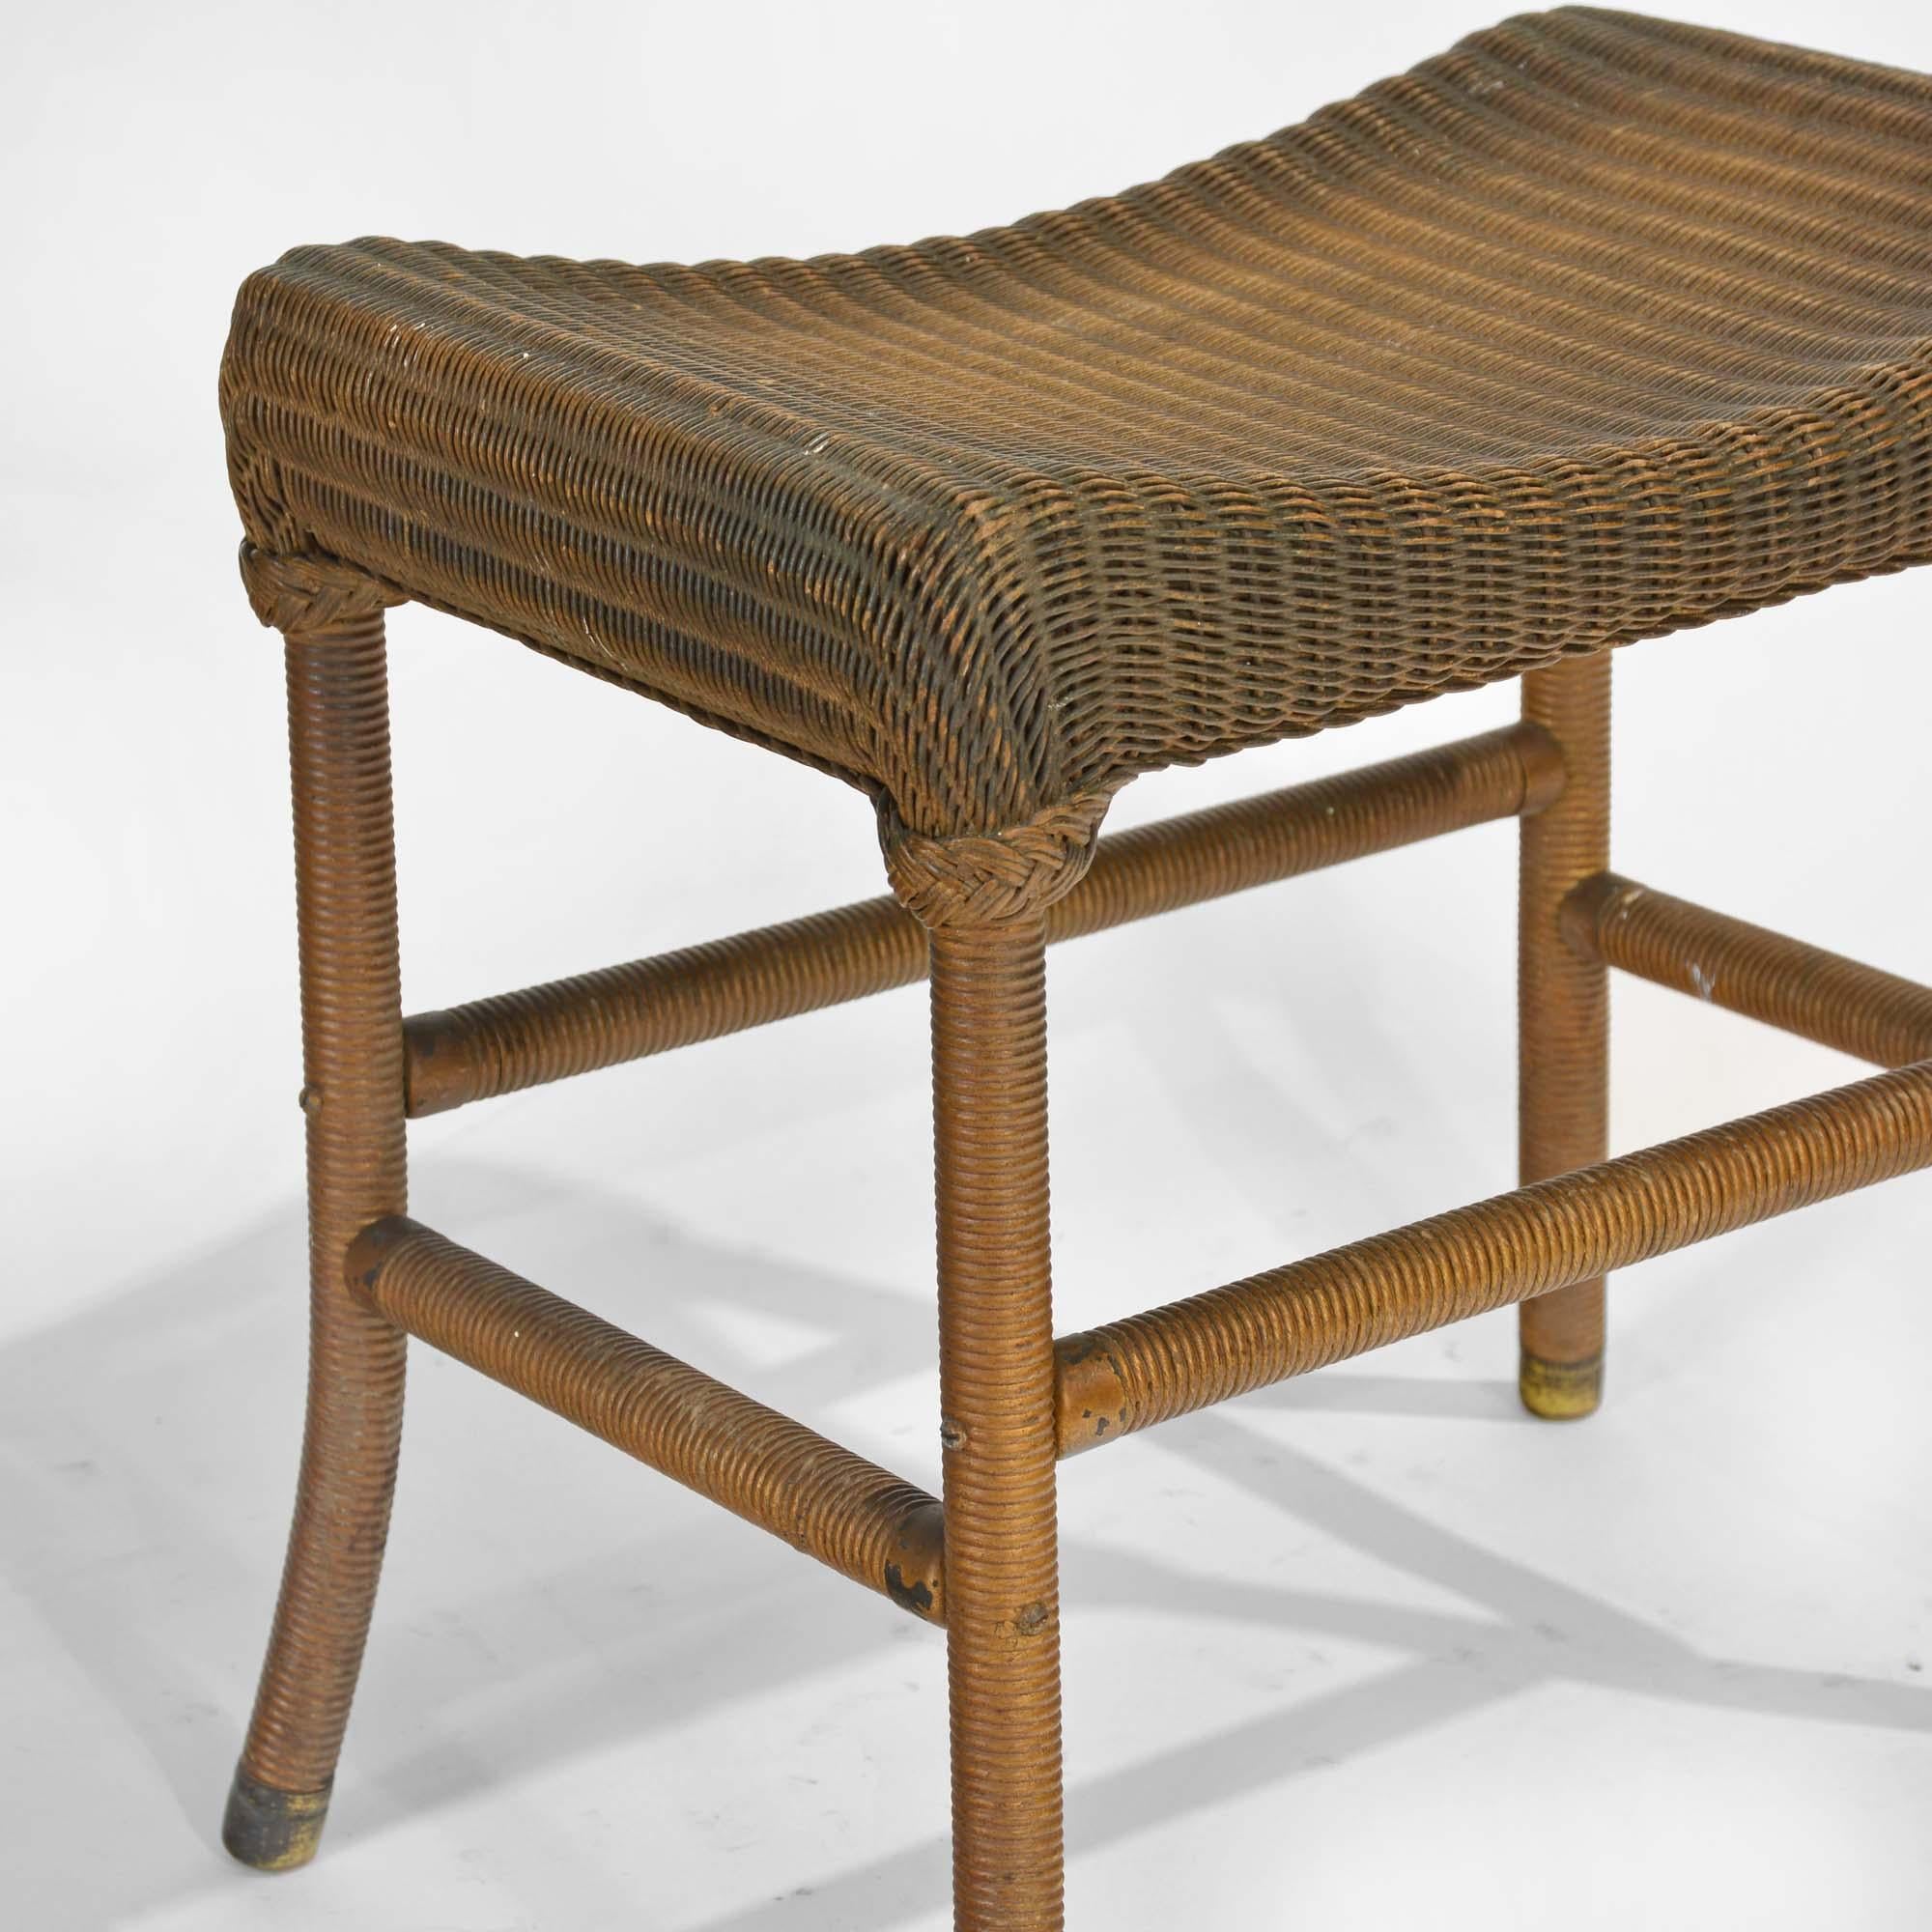 Lloyd Loom stool
Iconic 20th century design, the saddle seat stool in original gold paint, the Lloyd loom or weave is made from craft paper woven onto wire.   In lovely condition.
British, mid 20th century

48cm H, 50cm W, 32cm D.